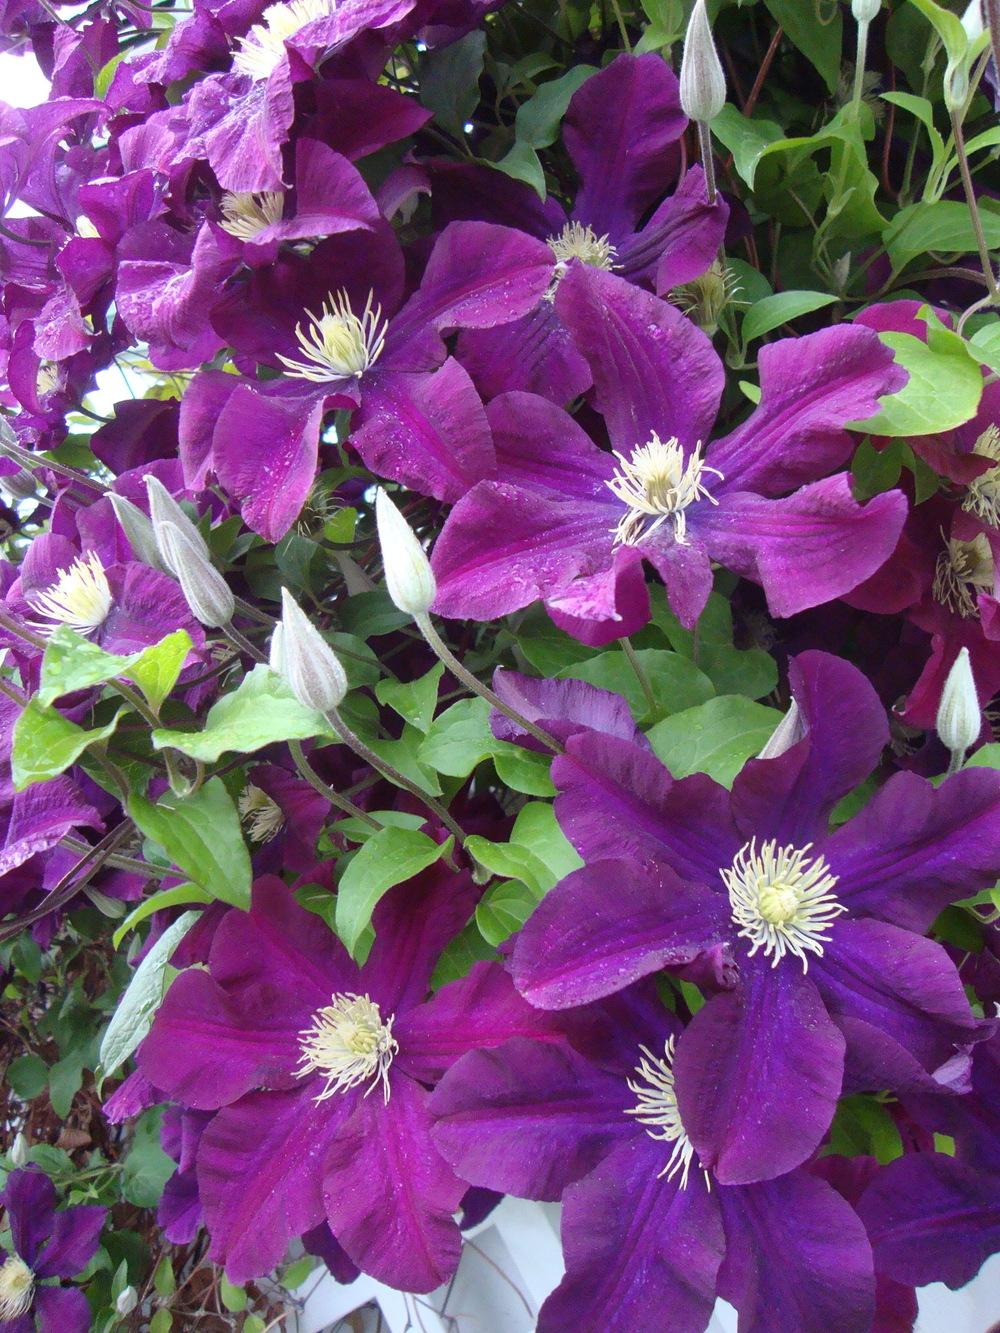 Photo of Clematis uploaded by Paul2032